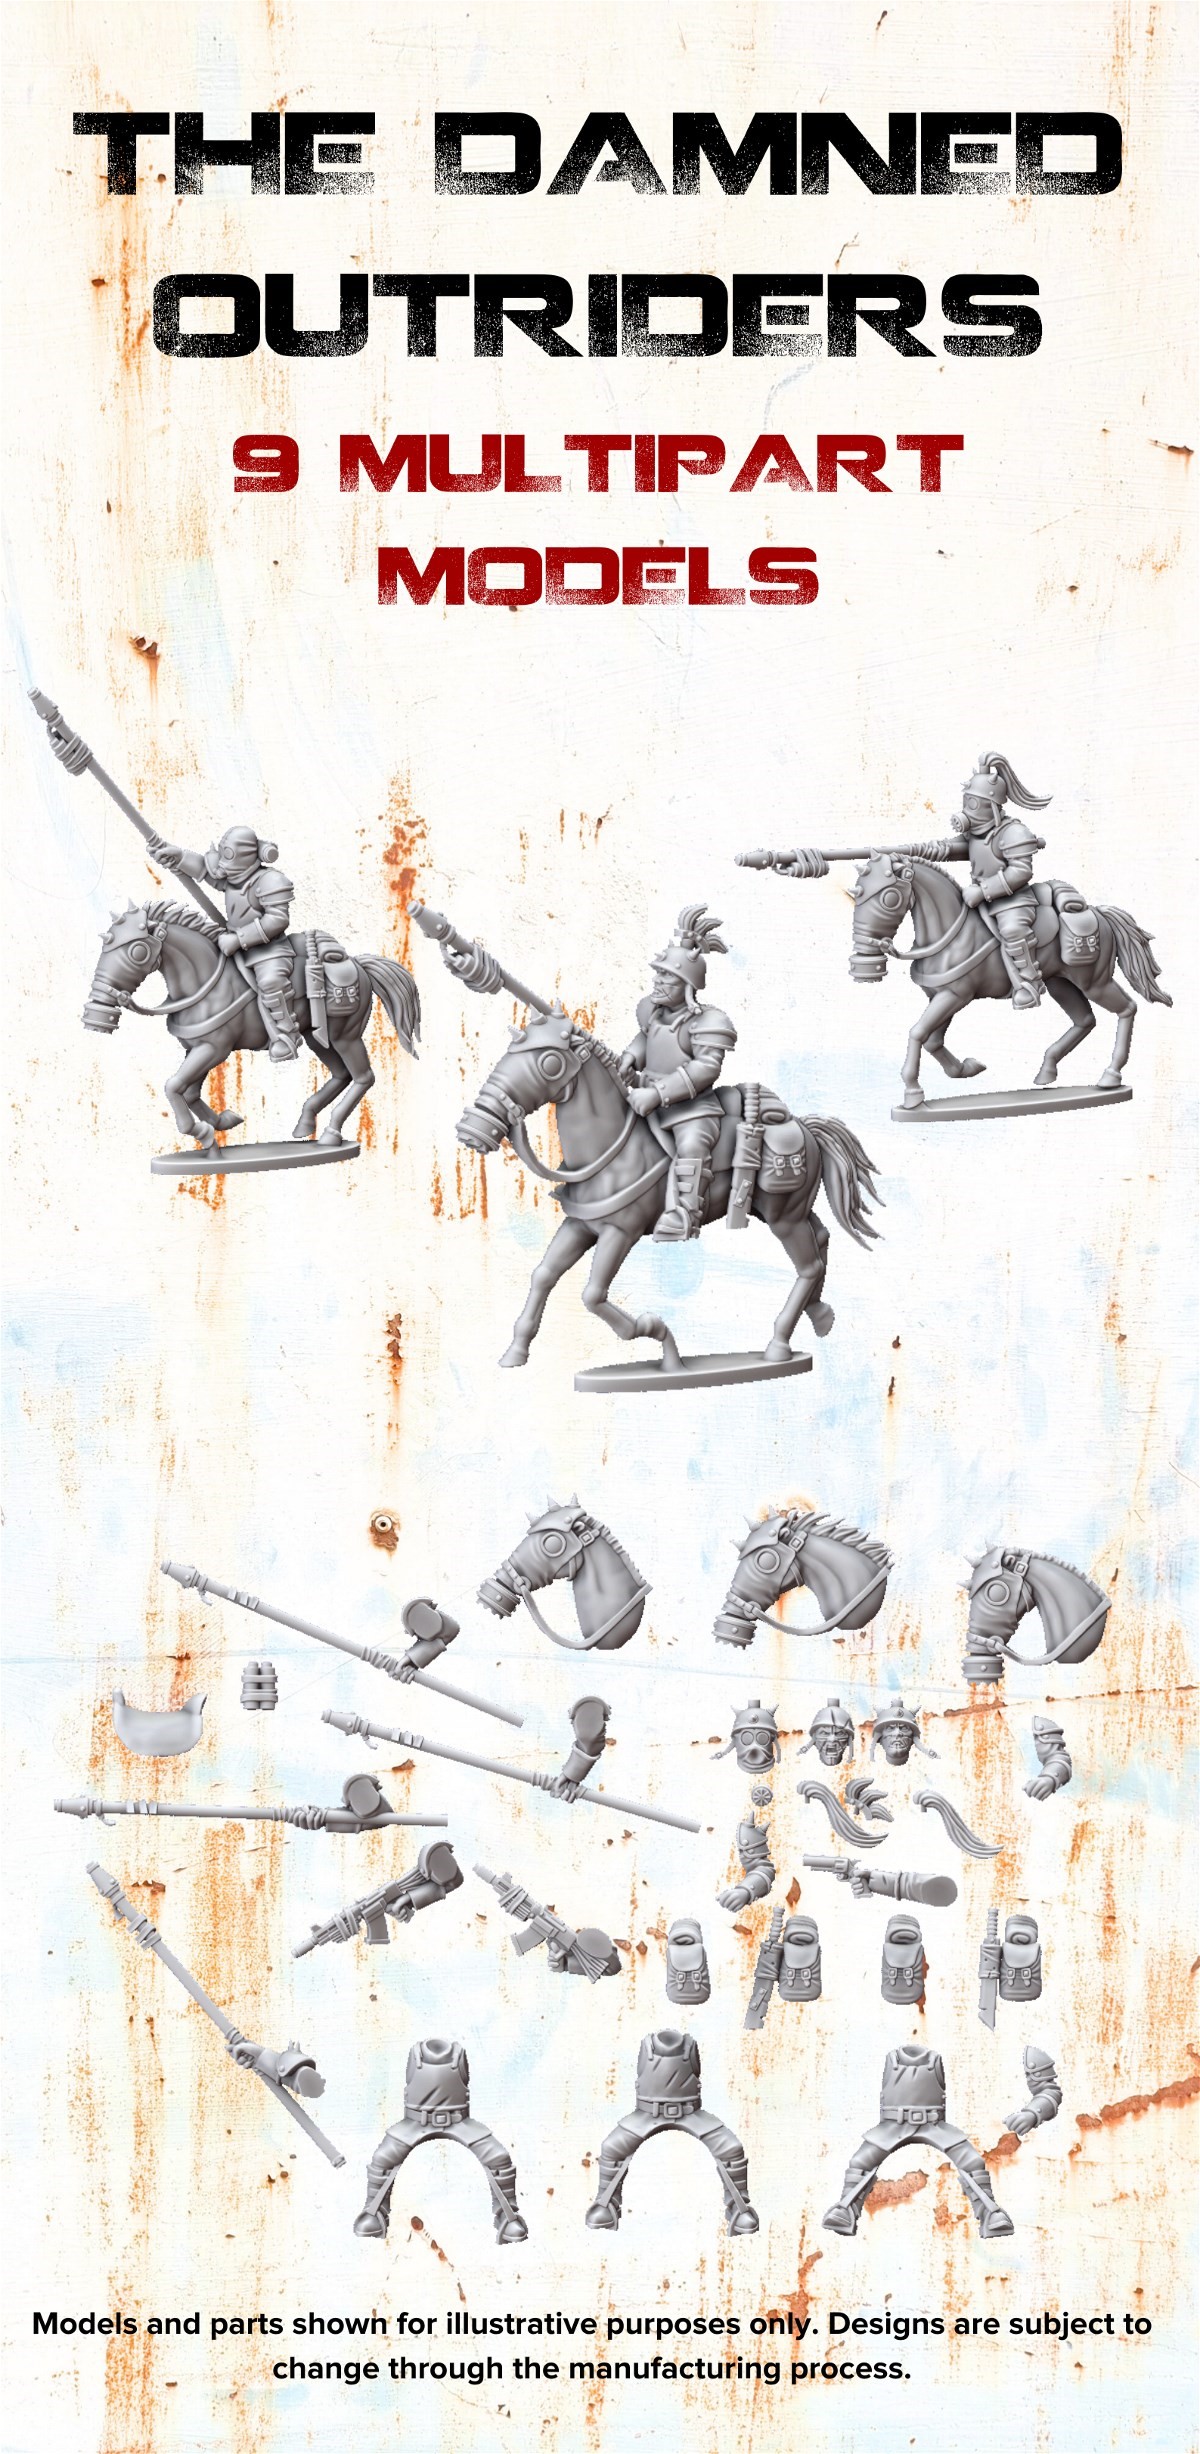 The Cavalry - AKA Rough Riders for 40K or Outriders with The Damned by Wargames Atlantic